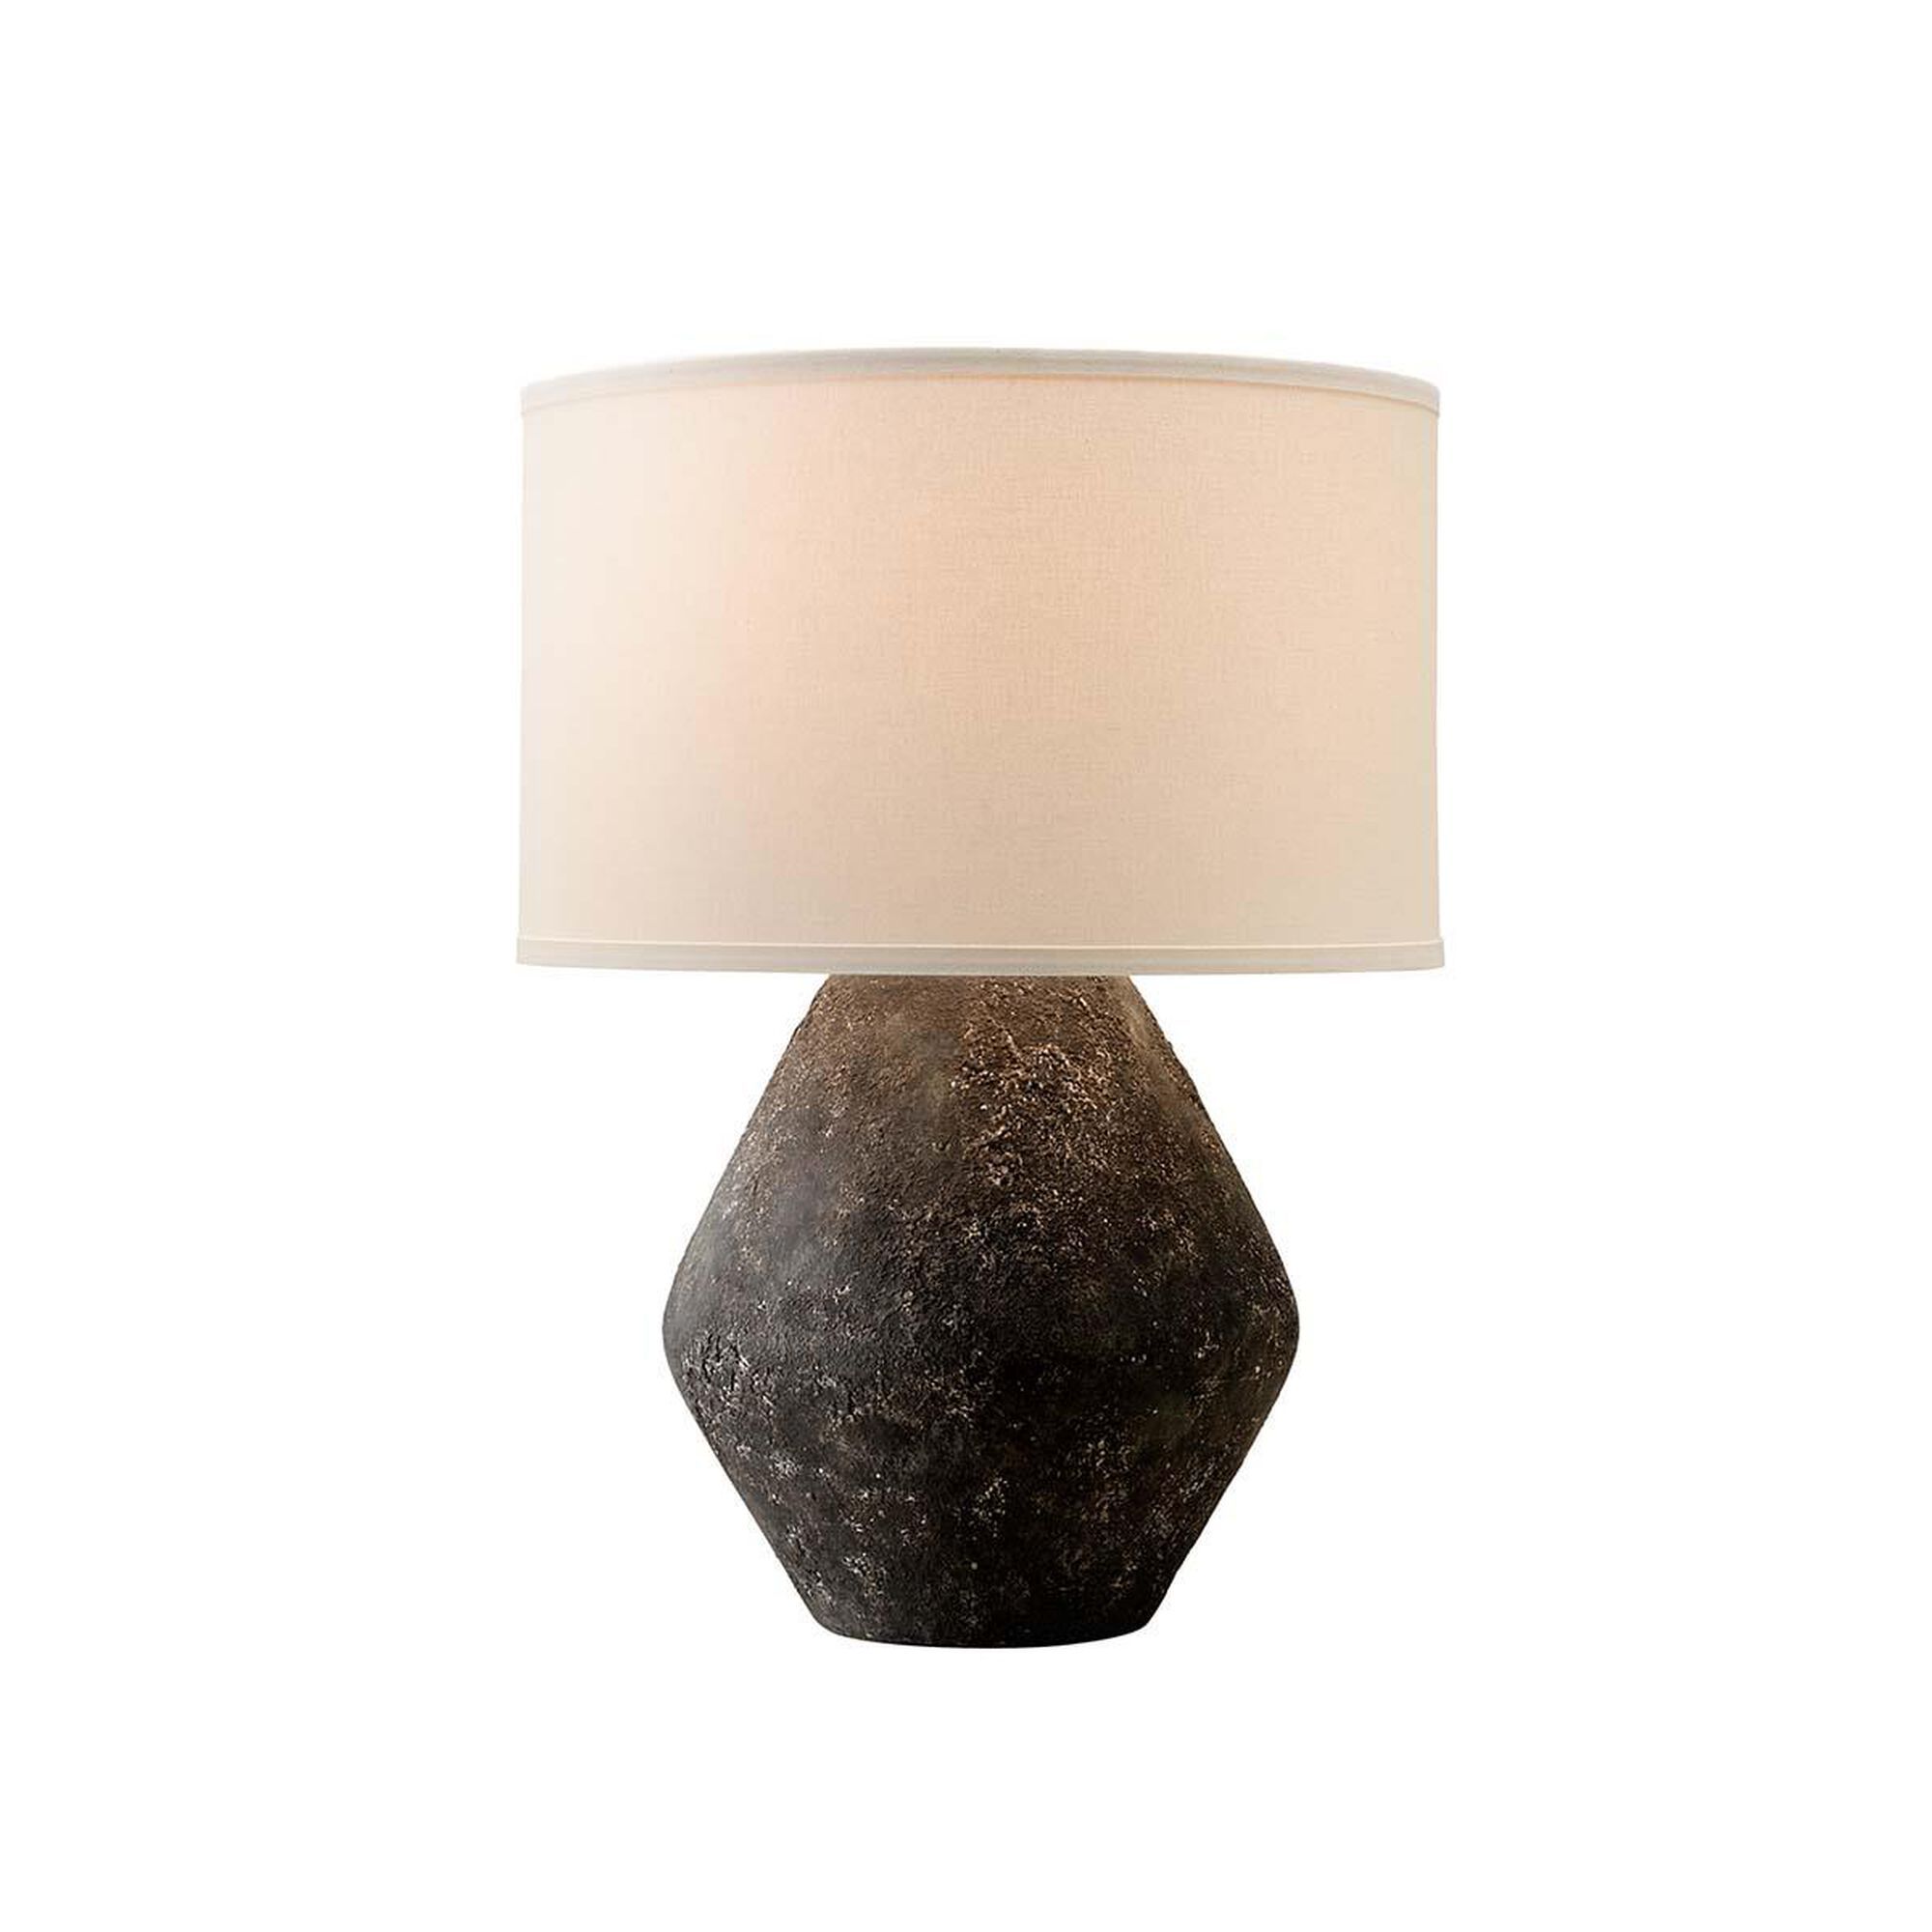 Artifact 23 Inch Table Lamp by Troy Lighting | 1800 Lighting